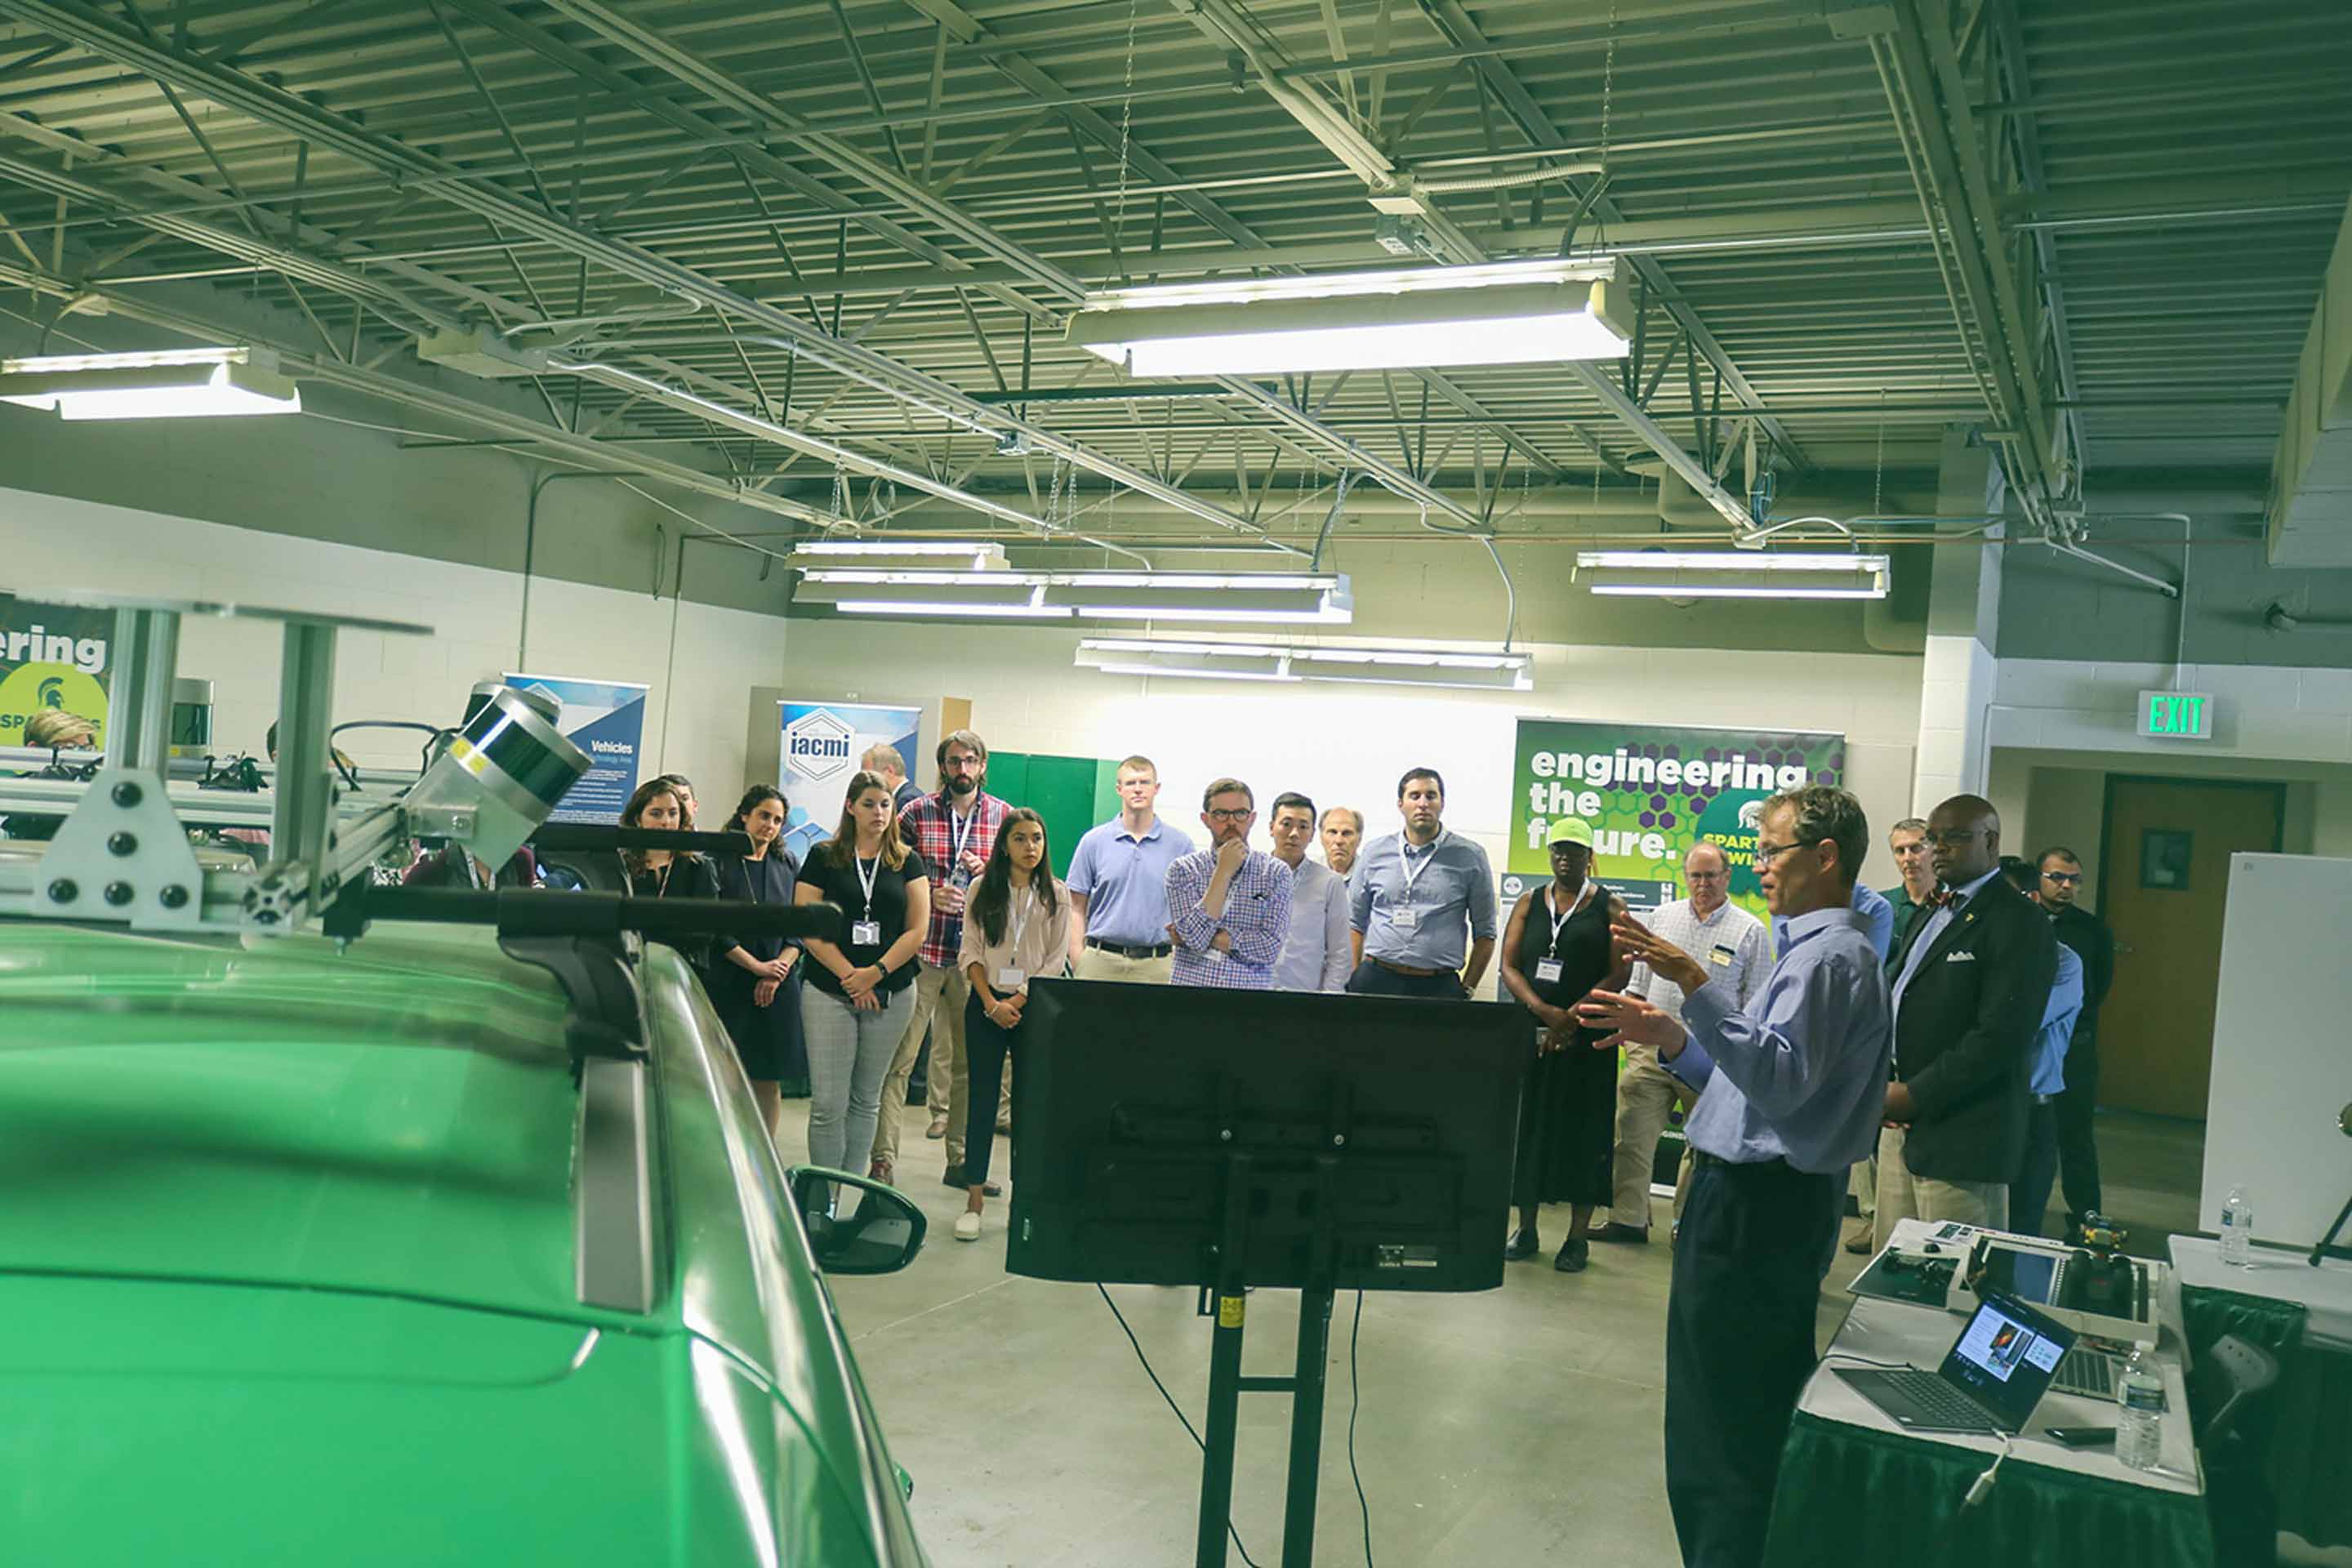 MSU Associate Professor Daniel Morris stands in front of a group in a lab space with one of MSU’s autonomous vehicles.